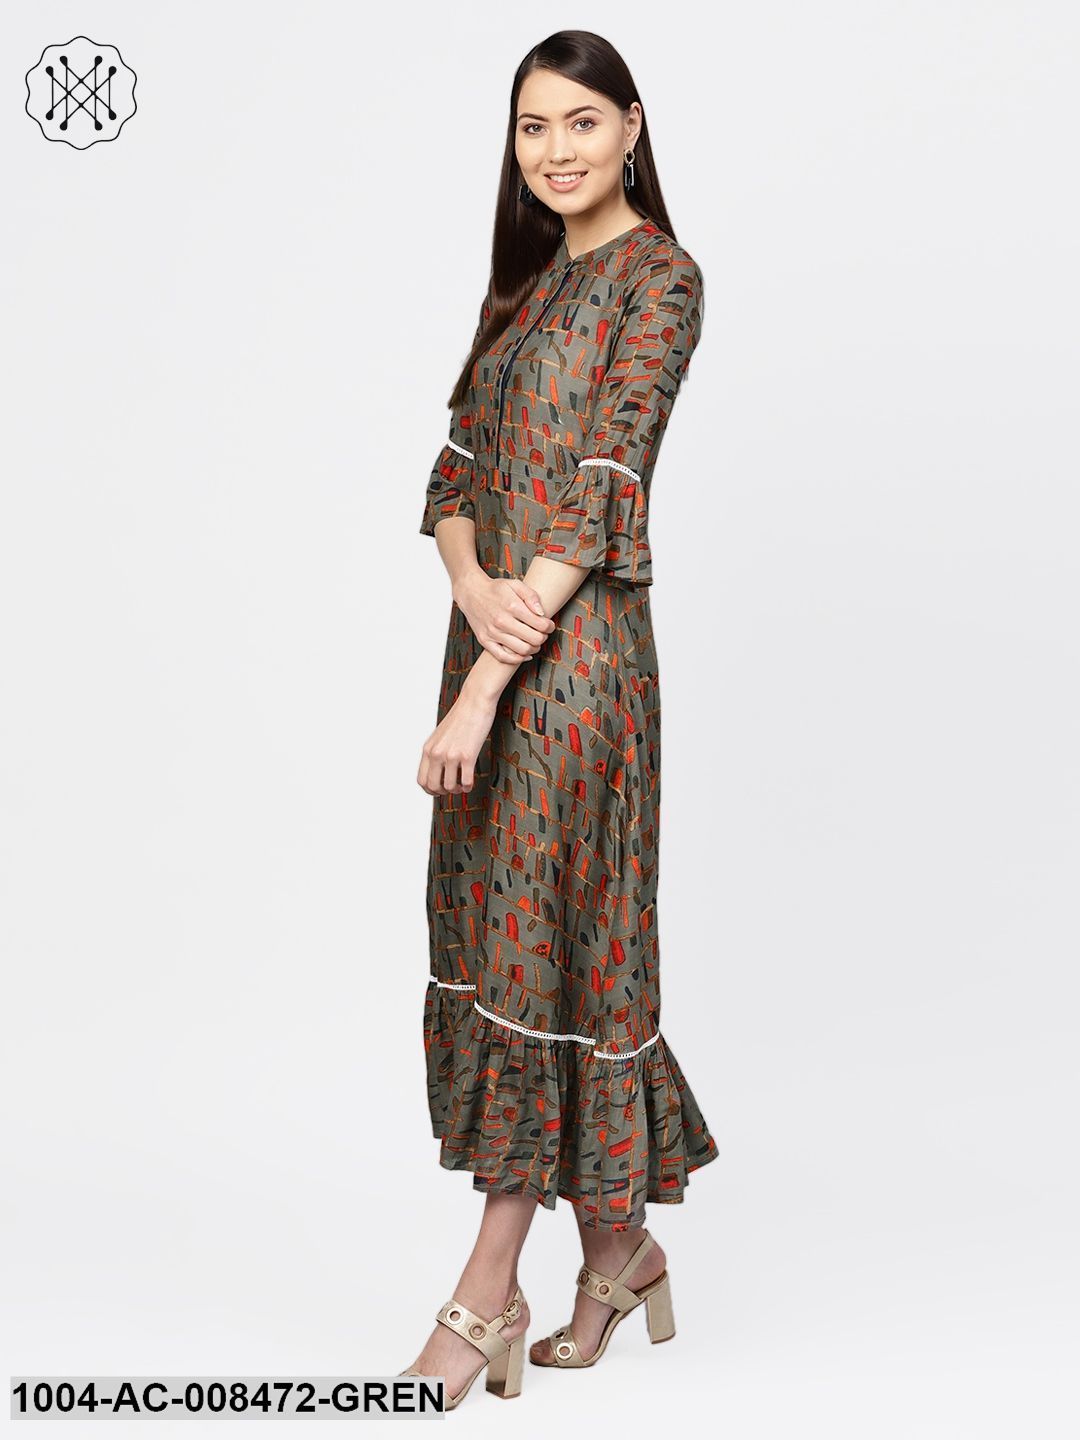 Abstract Multi Printed Chinese Collared Dress With Gathered Look At Hemline